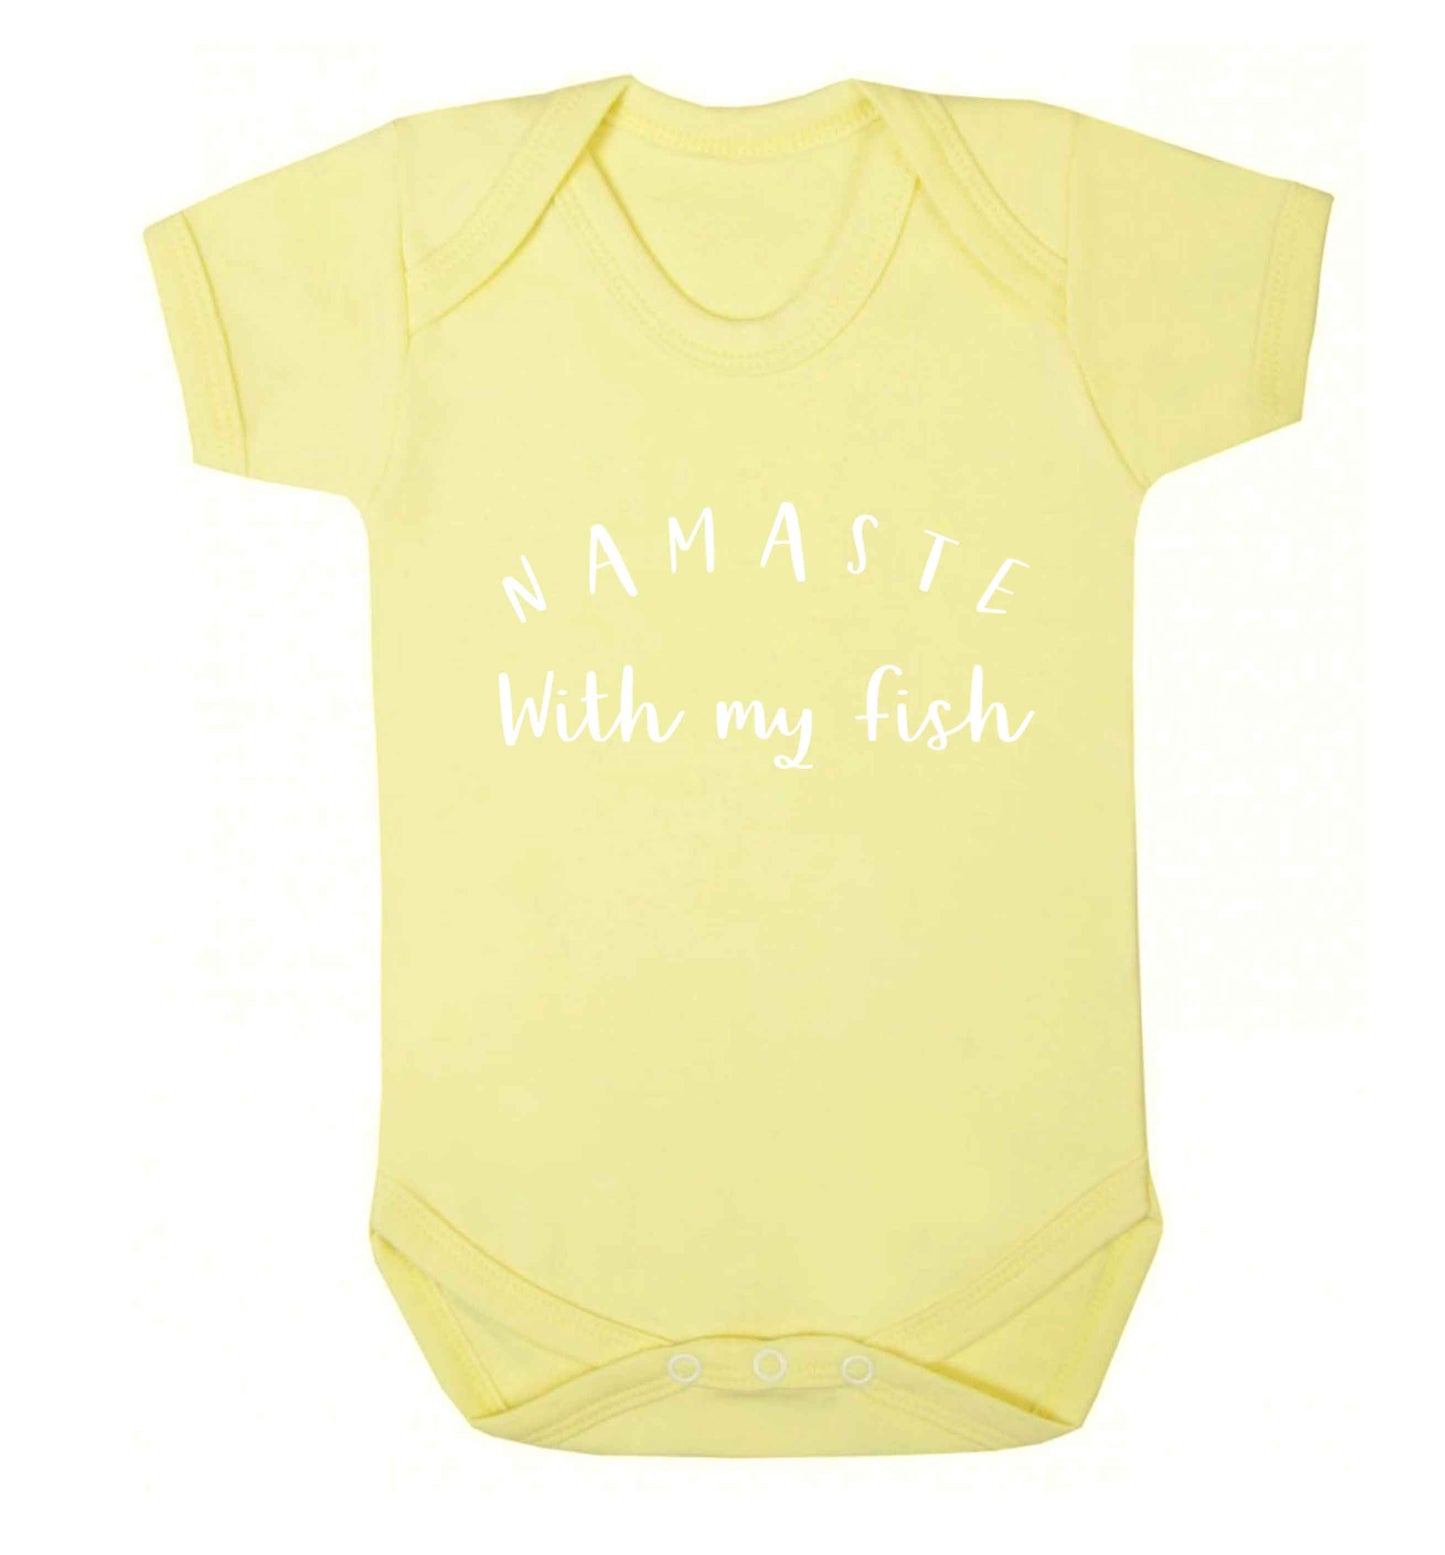 Namaste with my fish Baby Vest pale yellow 18-24 months